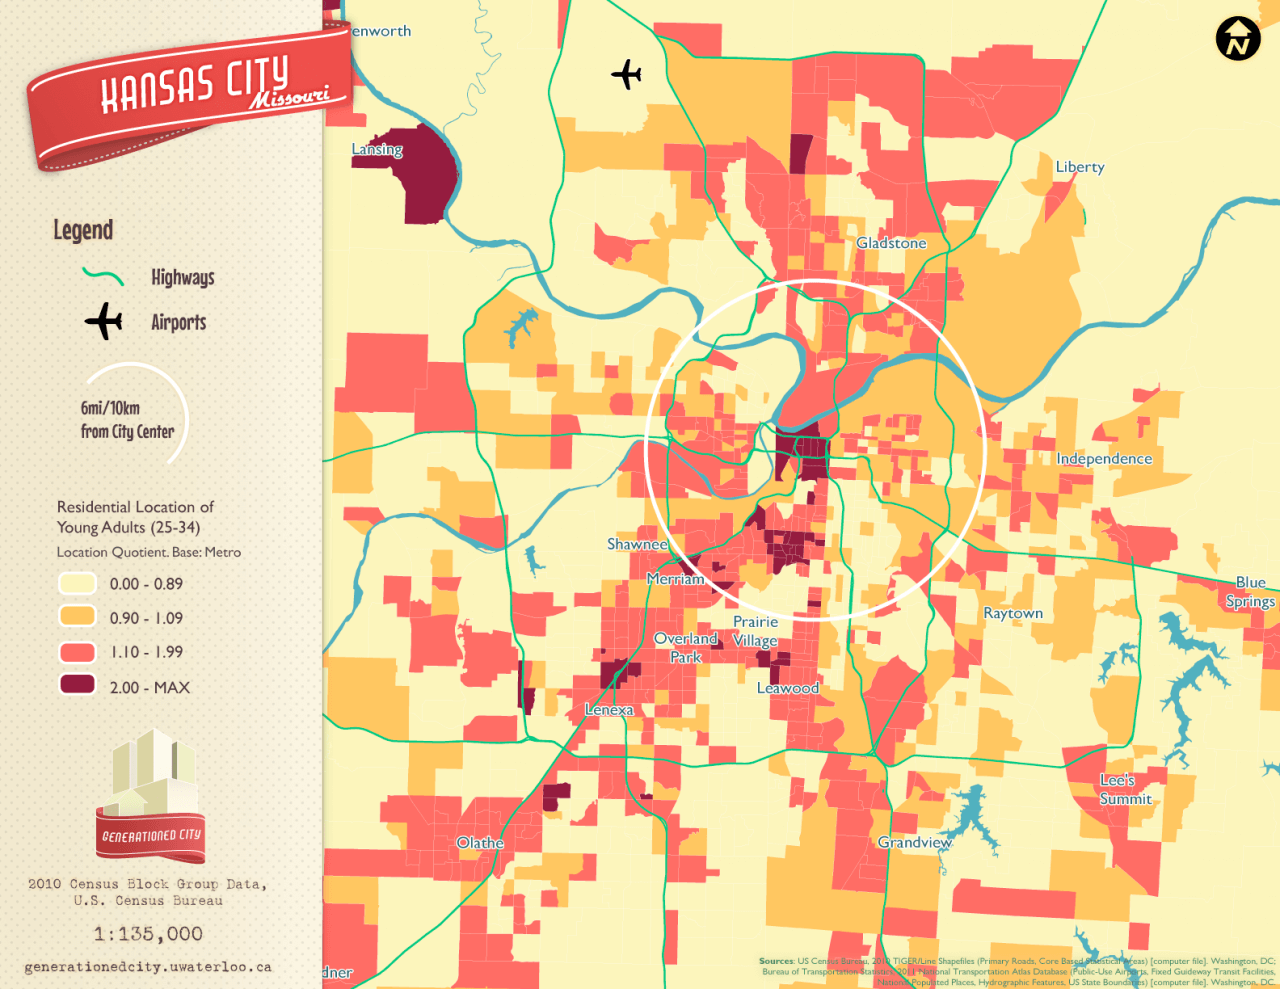 Residential location of young adults in Kansas City.